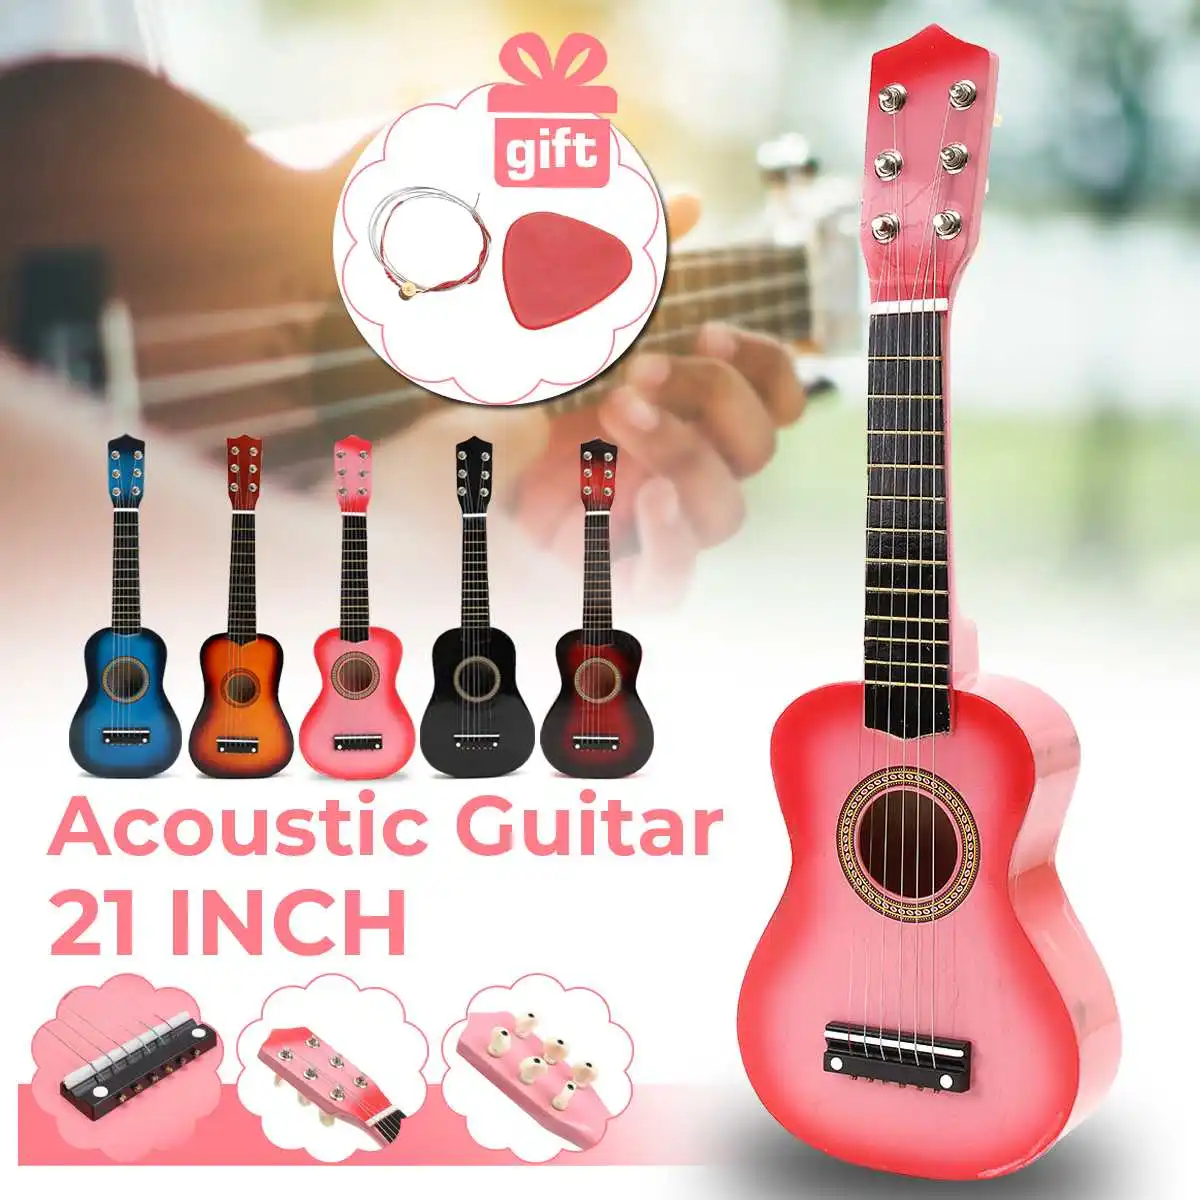 21inch Guitar Music Educational Toy Gift for Kids Children Guitar Stringed Instrument with one Pick and a String Red Brown